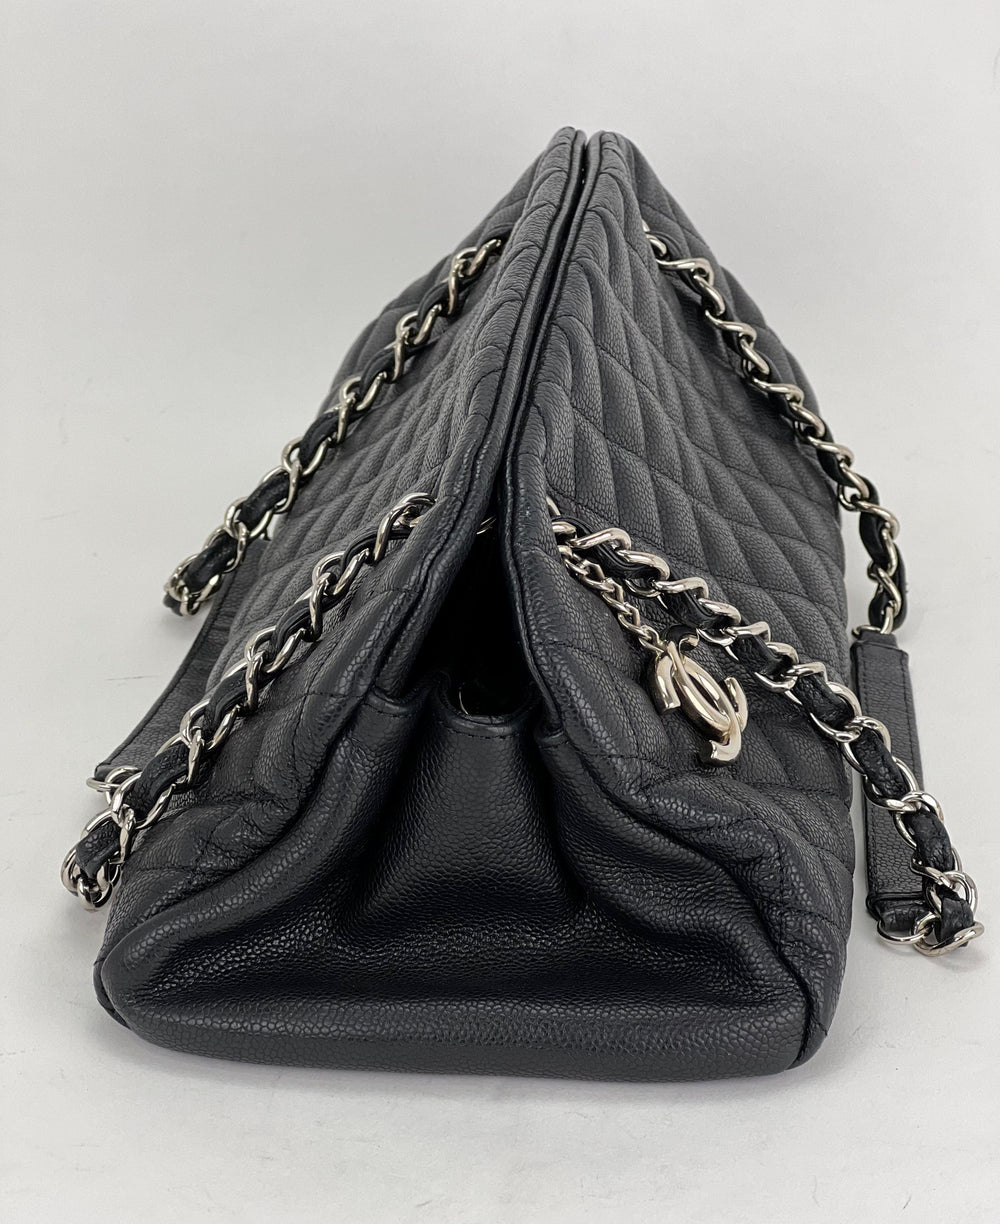 Chanel Medium Charm Tote in Black Caviar with Ruthenium Hardware - SOLD